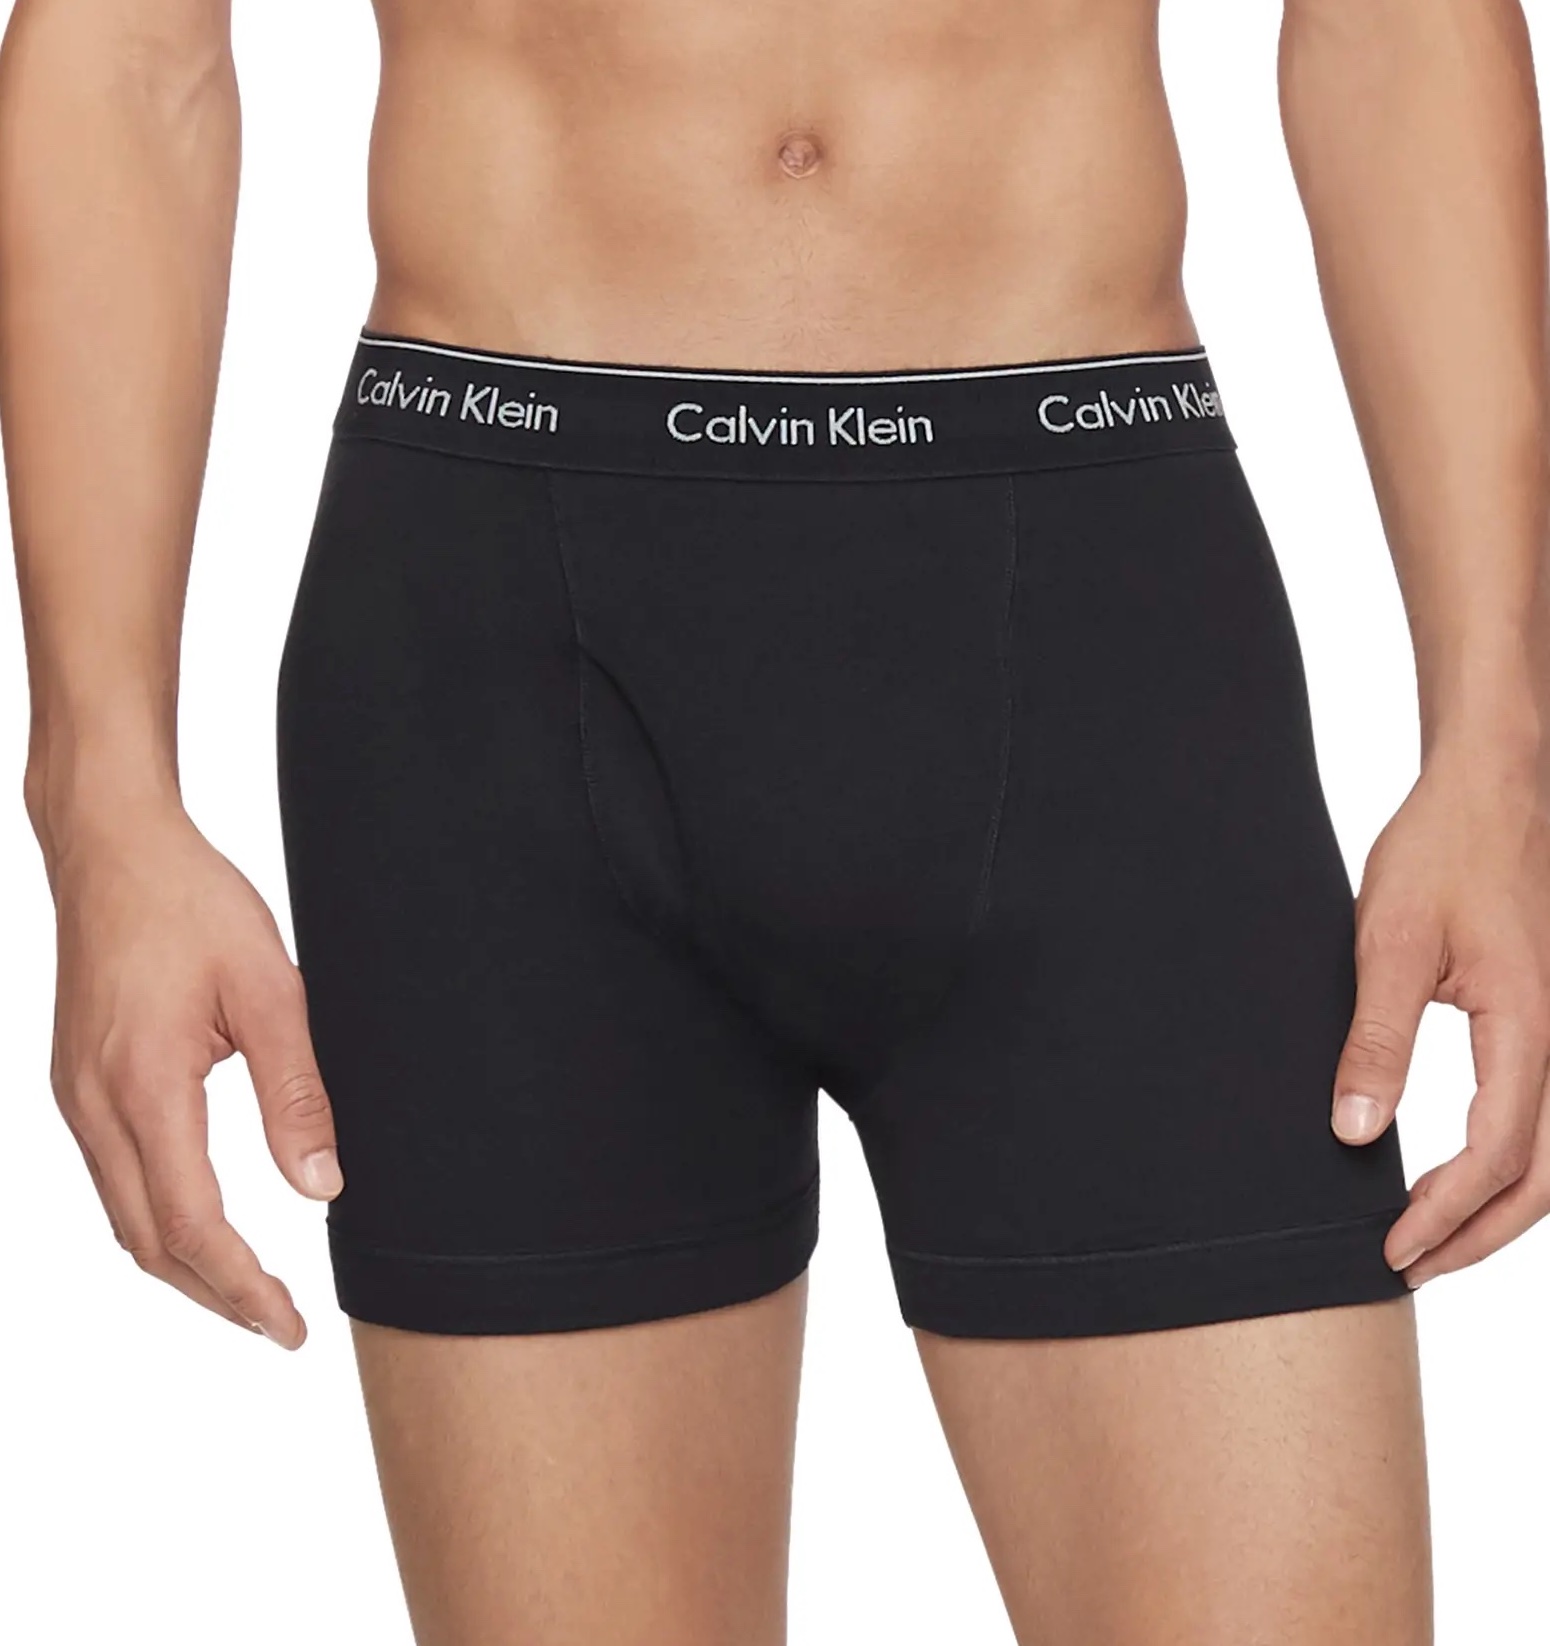 Stock Up on Calvin Klein Boxer Briefs with This 20% off Offer - The Manual